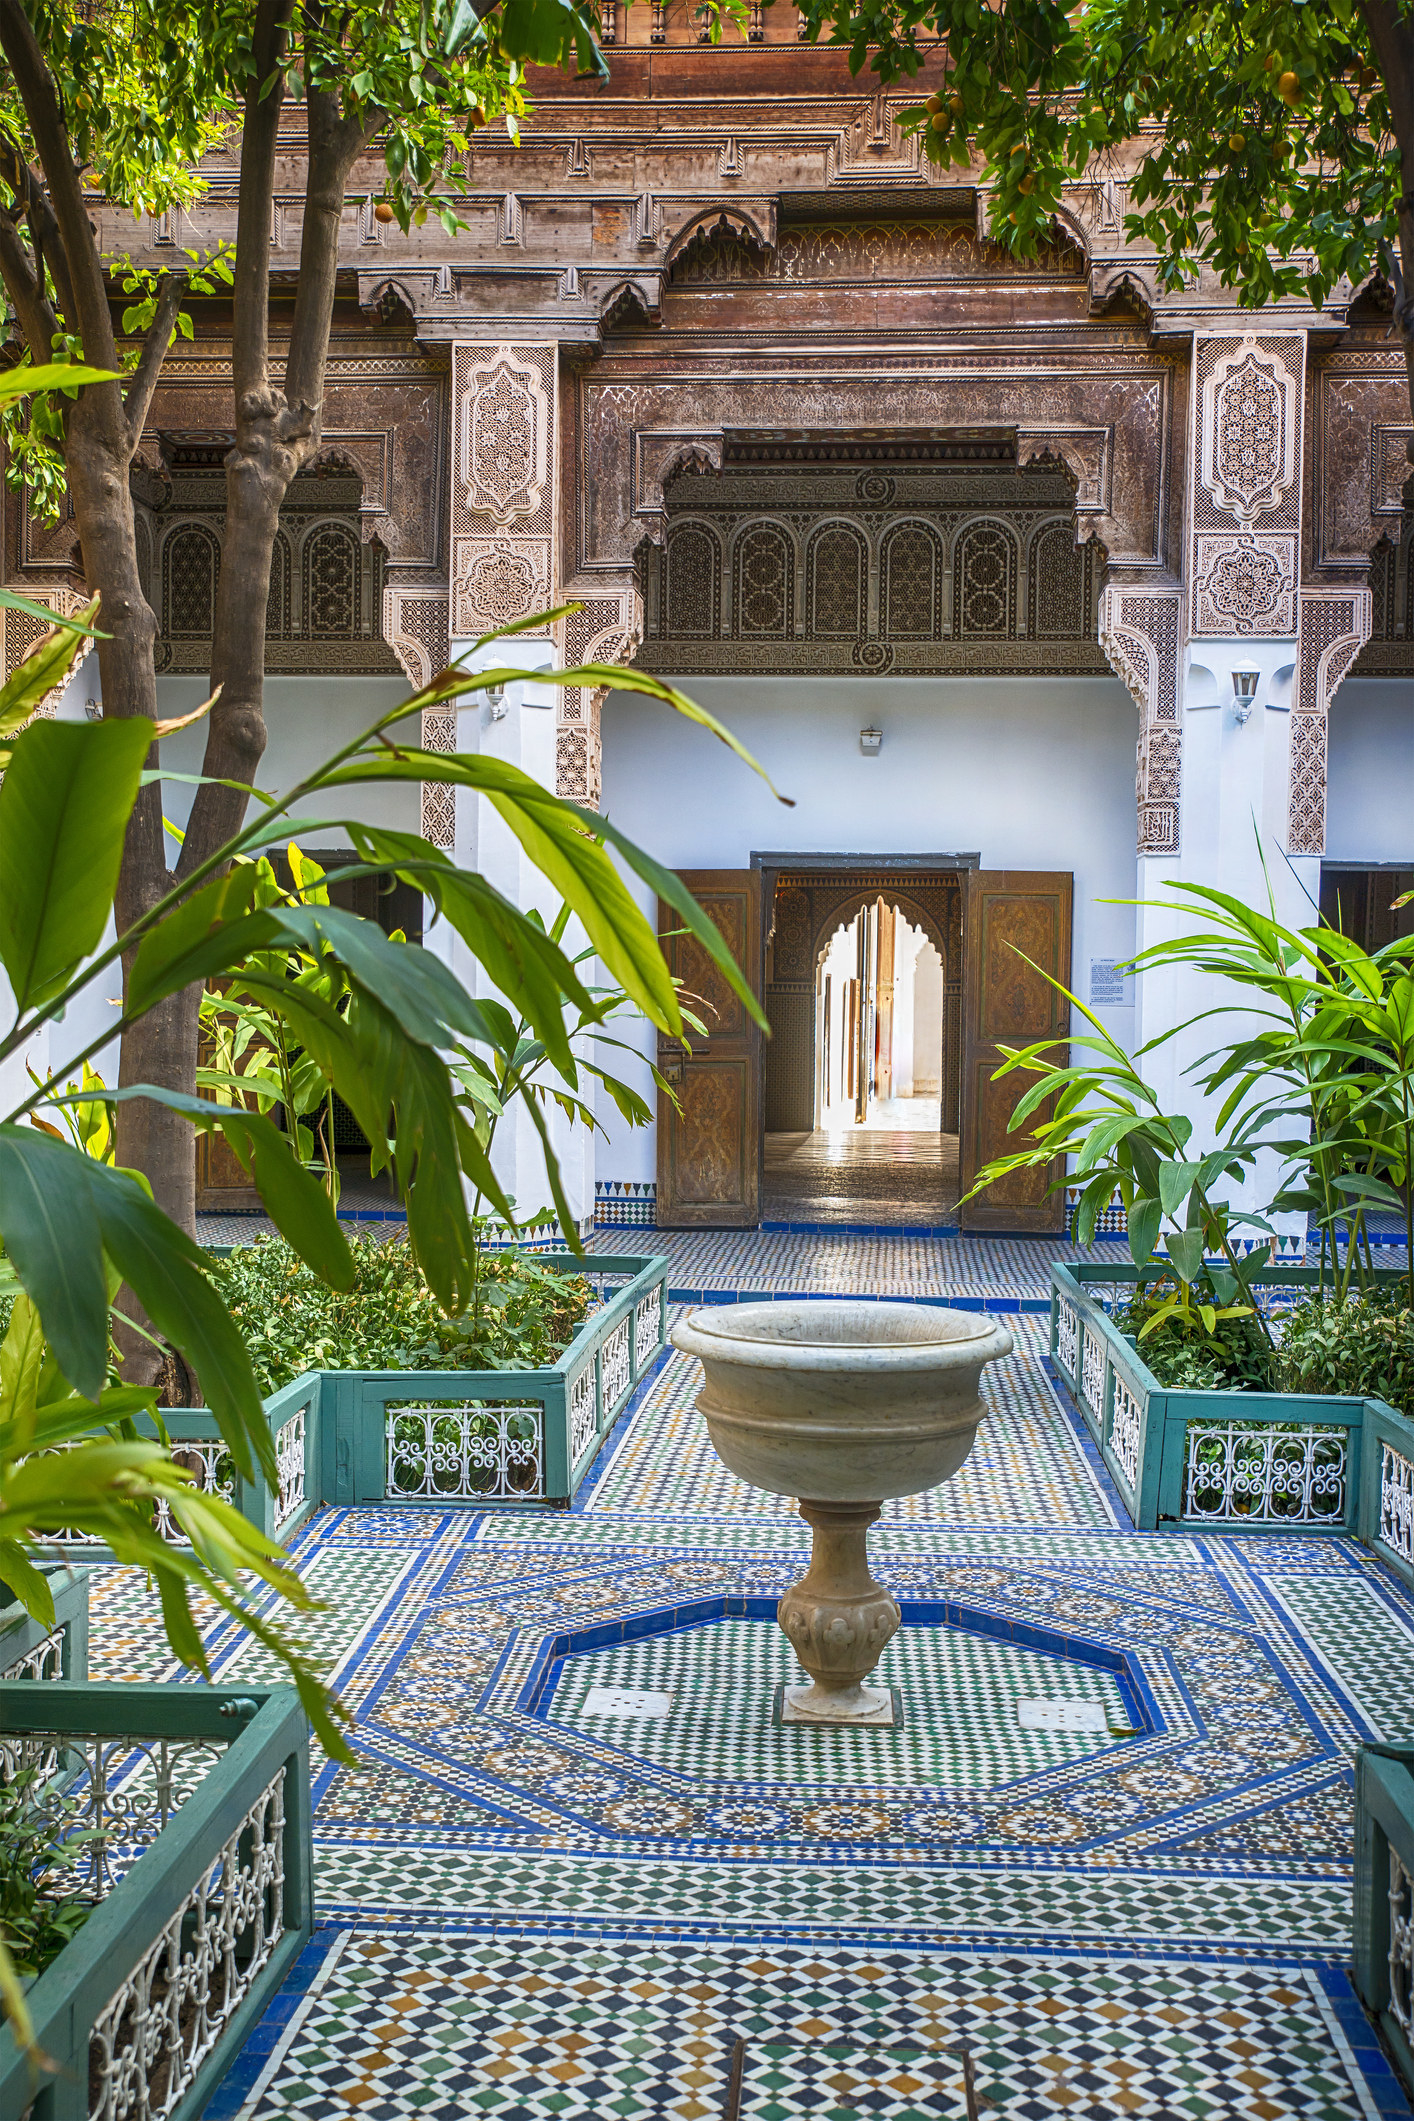 A courtyard in Morocco with tiles and a fountain.